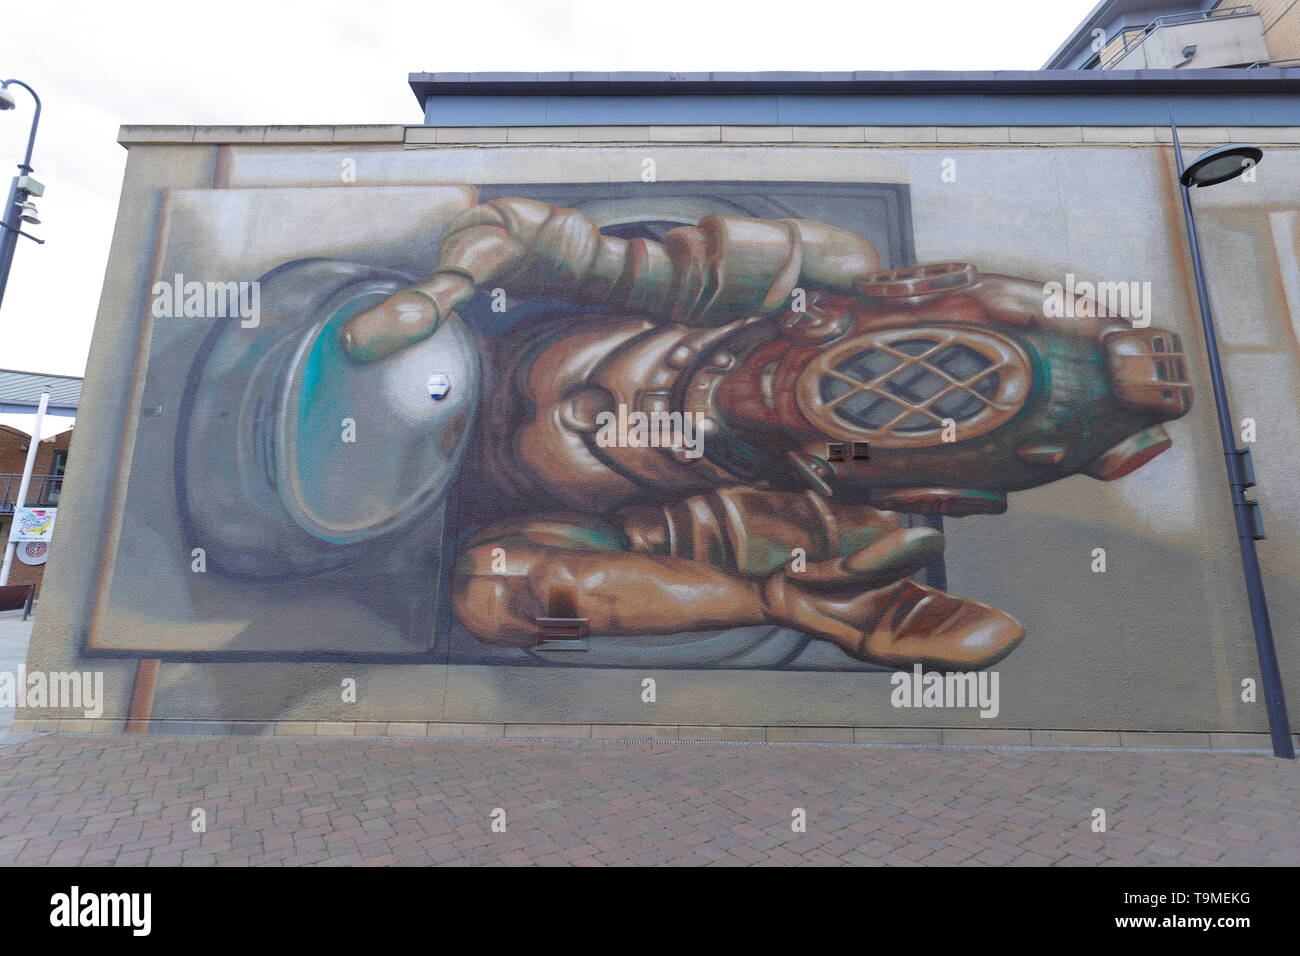 A painted mural of a deep sea diver climbing out of a washing machine on apartment blocks in Brewery Wharf,Leeds, West Yorkshire. Stock Photo